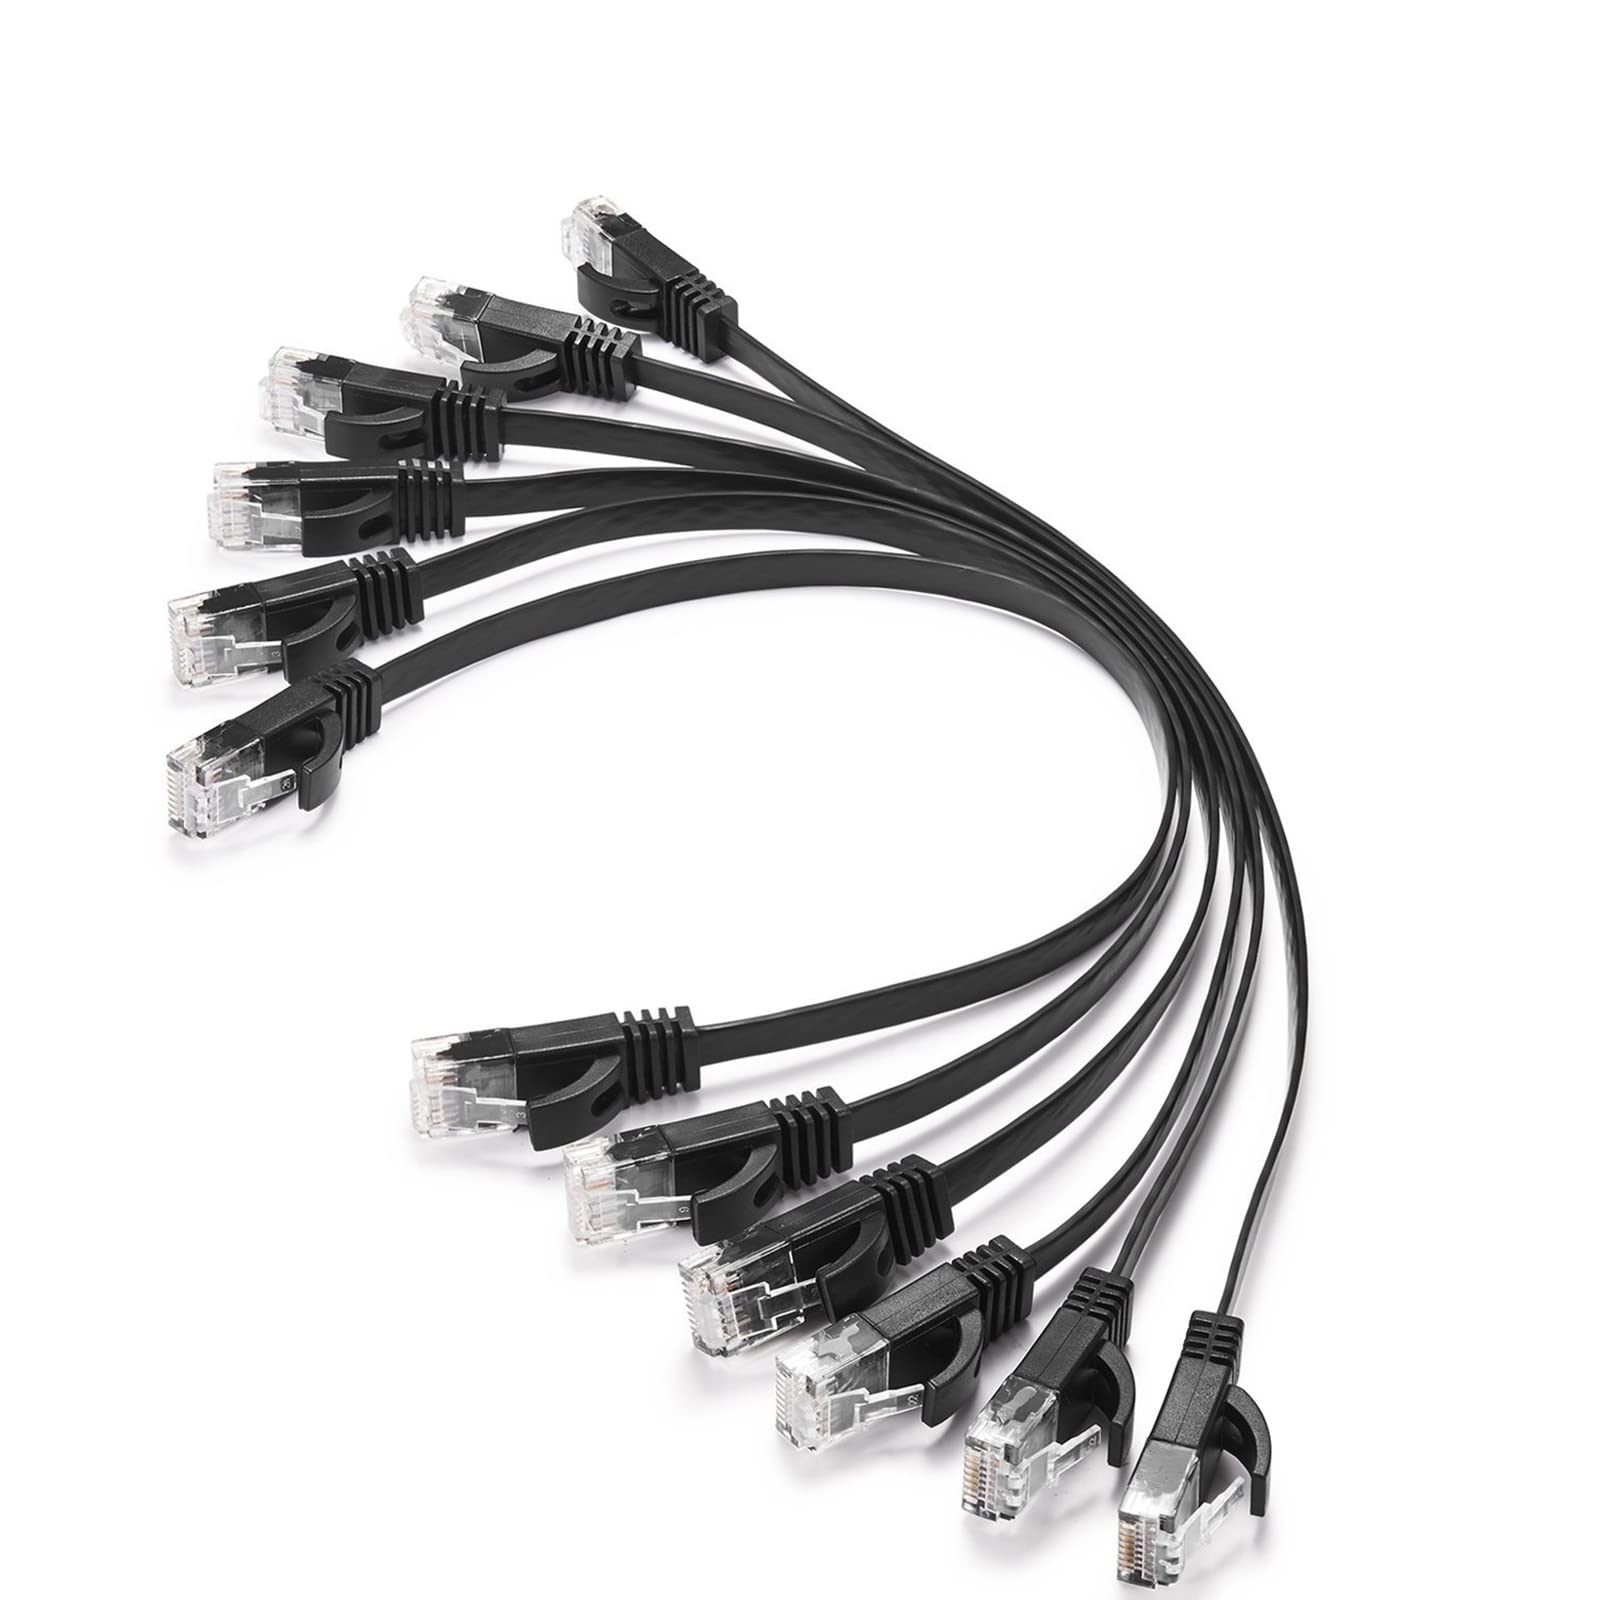 Book Cover Cat 6 Ethernet Cable 1 Ft (6Pack), Outdoor&Indoor, 10Gbps Support Cat7 Network, Heavy Duty Flat Internet LAN Patch Cord, Solid High Speed Weatherproof Cable for Router, Modem, Xbox, PS4, Switch, Black 1ft-6Pack Black